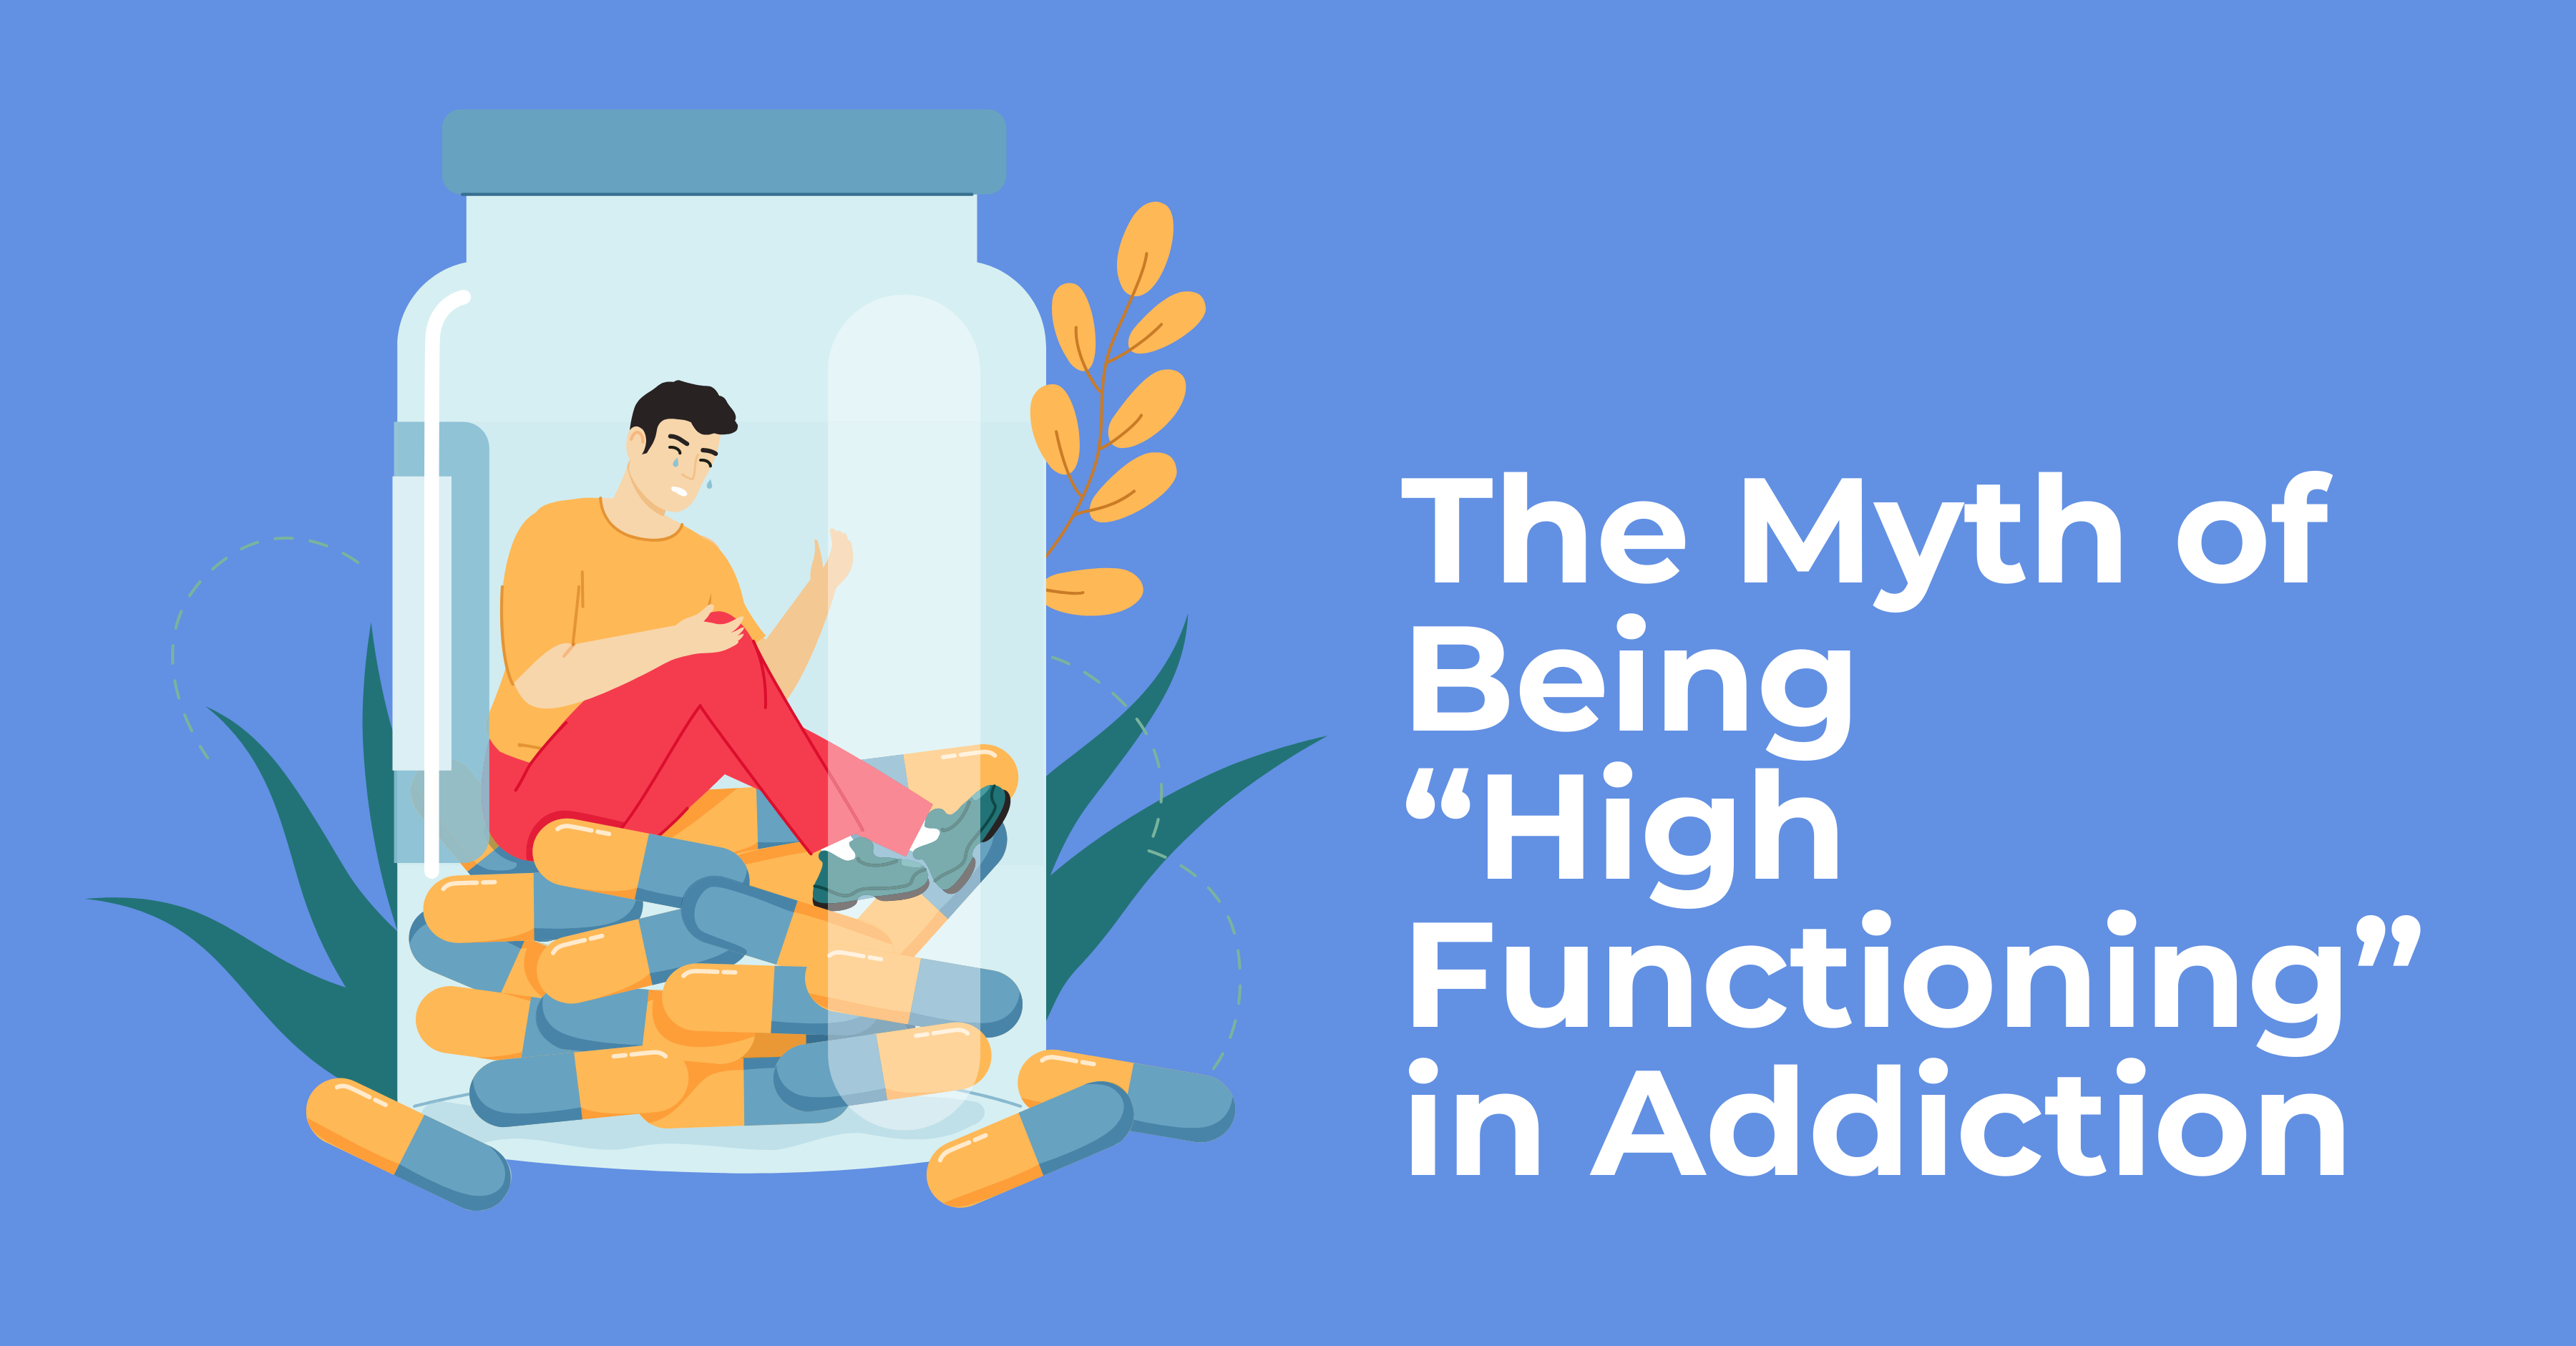 The Myth of Being “High Functioning” in Addiction